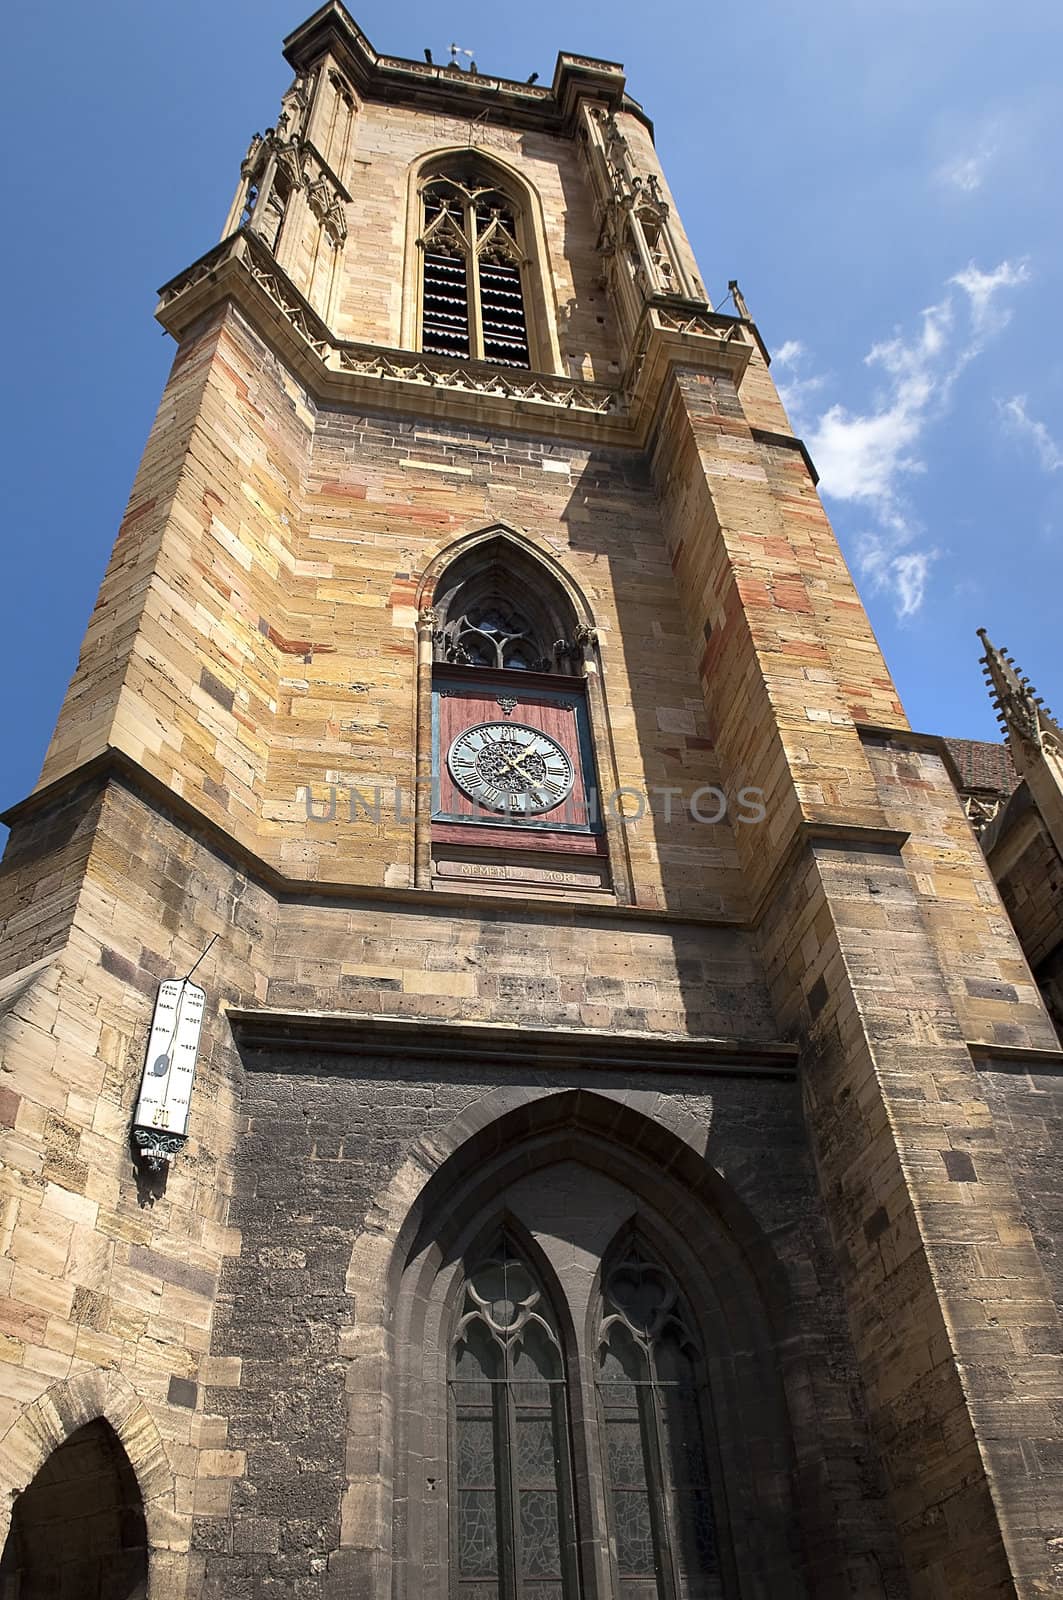 urban landscape of the historical town of Colmar in France







City clock tower in Colmar,France